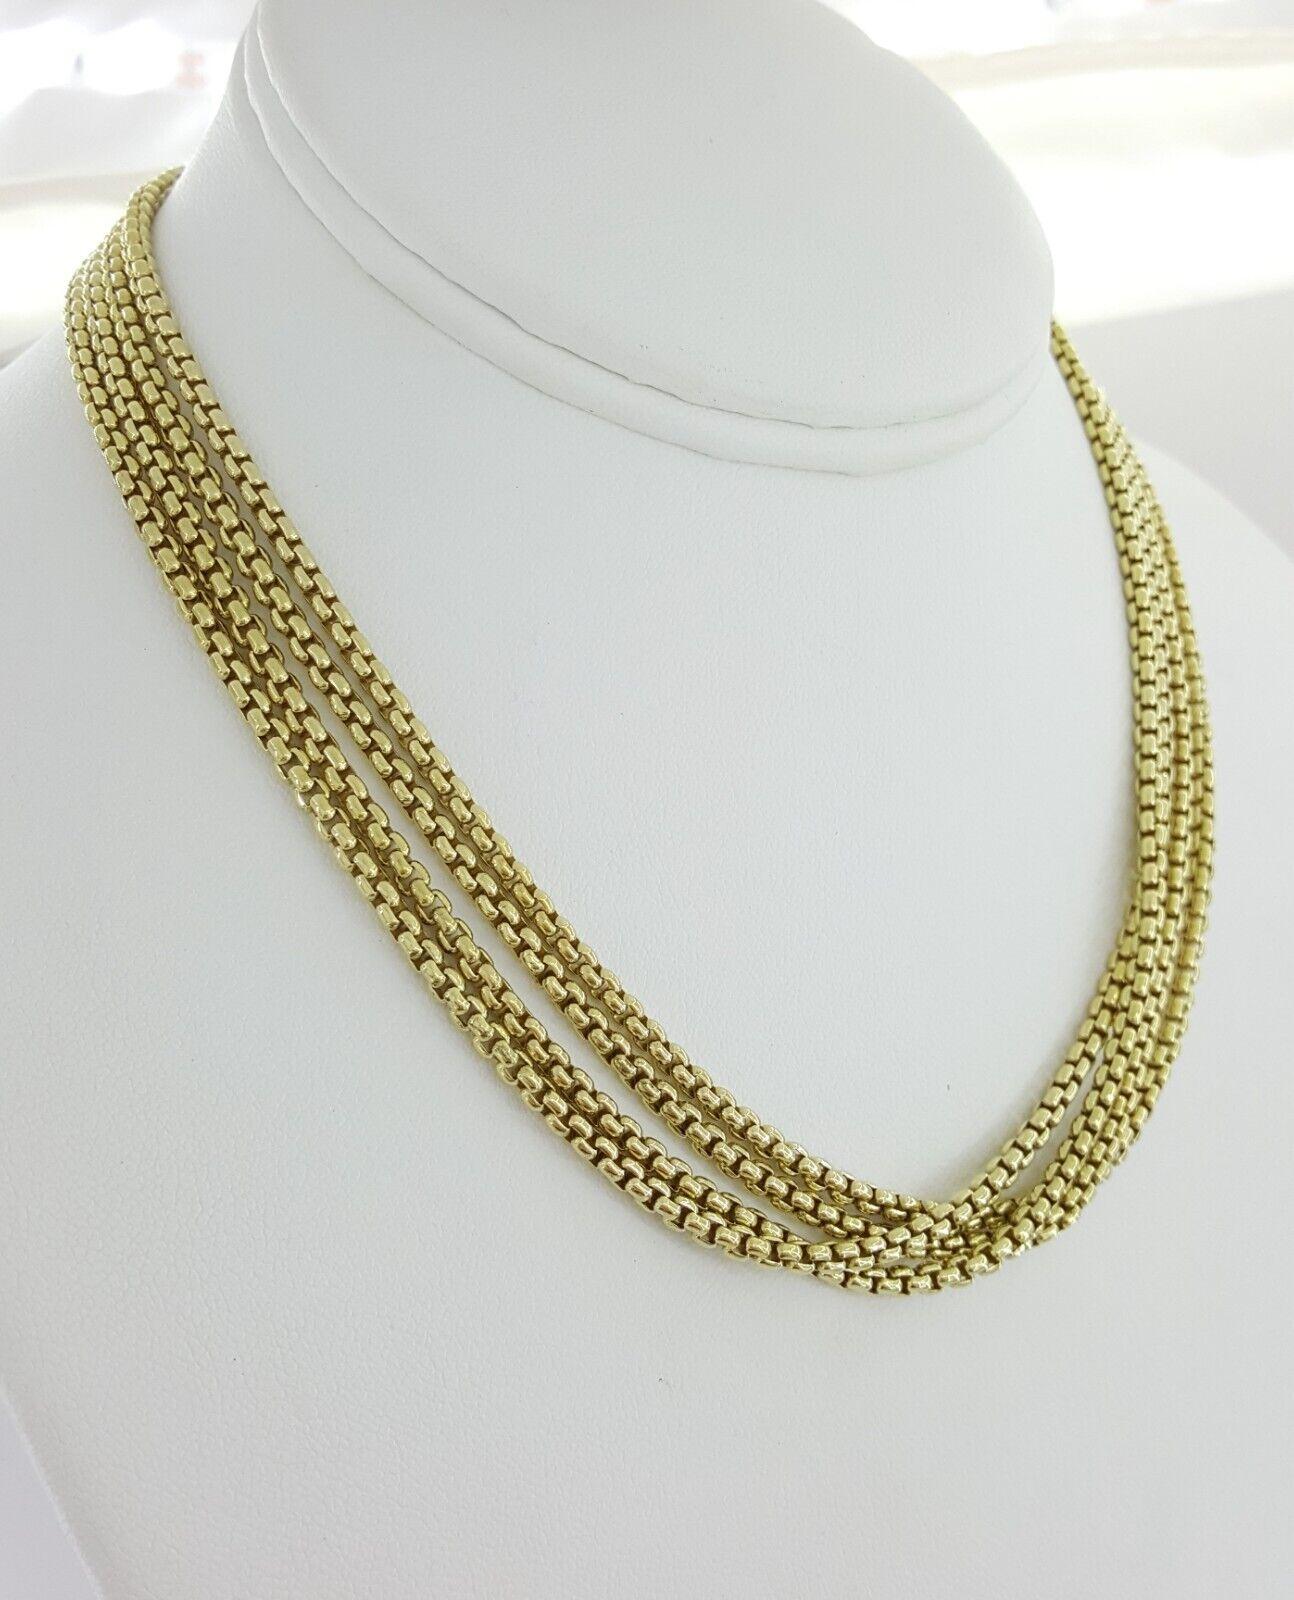  David Yurman 18k Yellow Gold Multi Cable Chain Necklace with Four 2.5 mm Round Box Chain 16